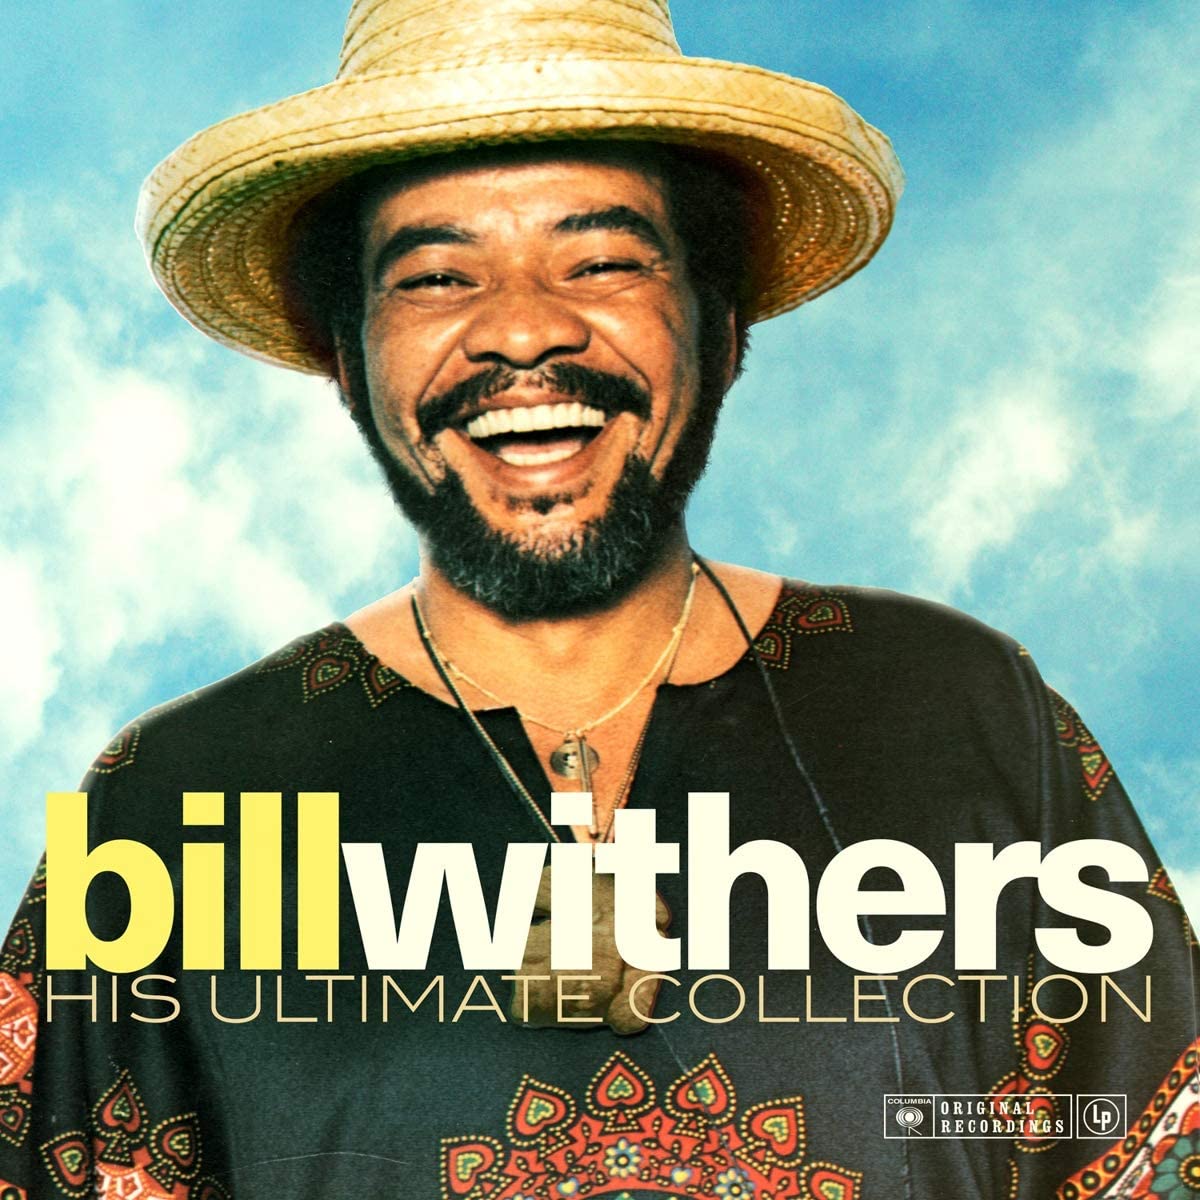 Get all of Bill Wither's best tracks on one LP! Featuring "Lean On Me," "Ain't No Sunshine" & more.